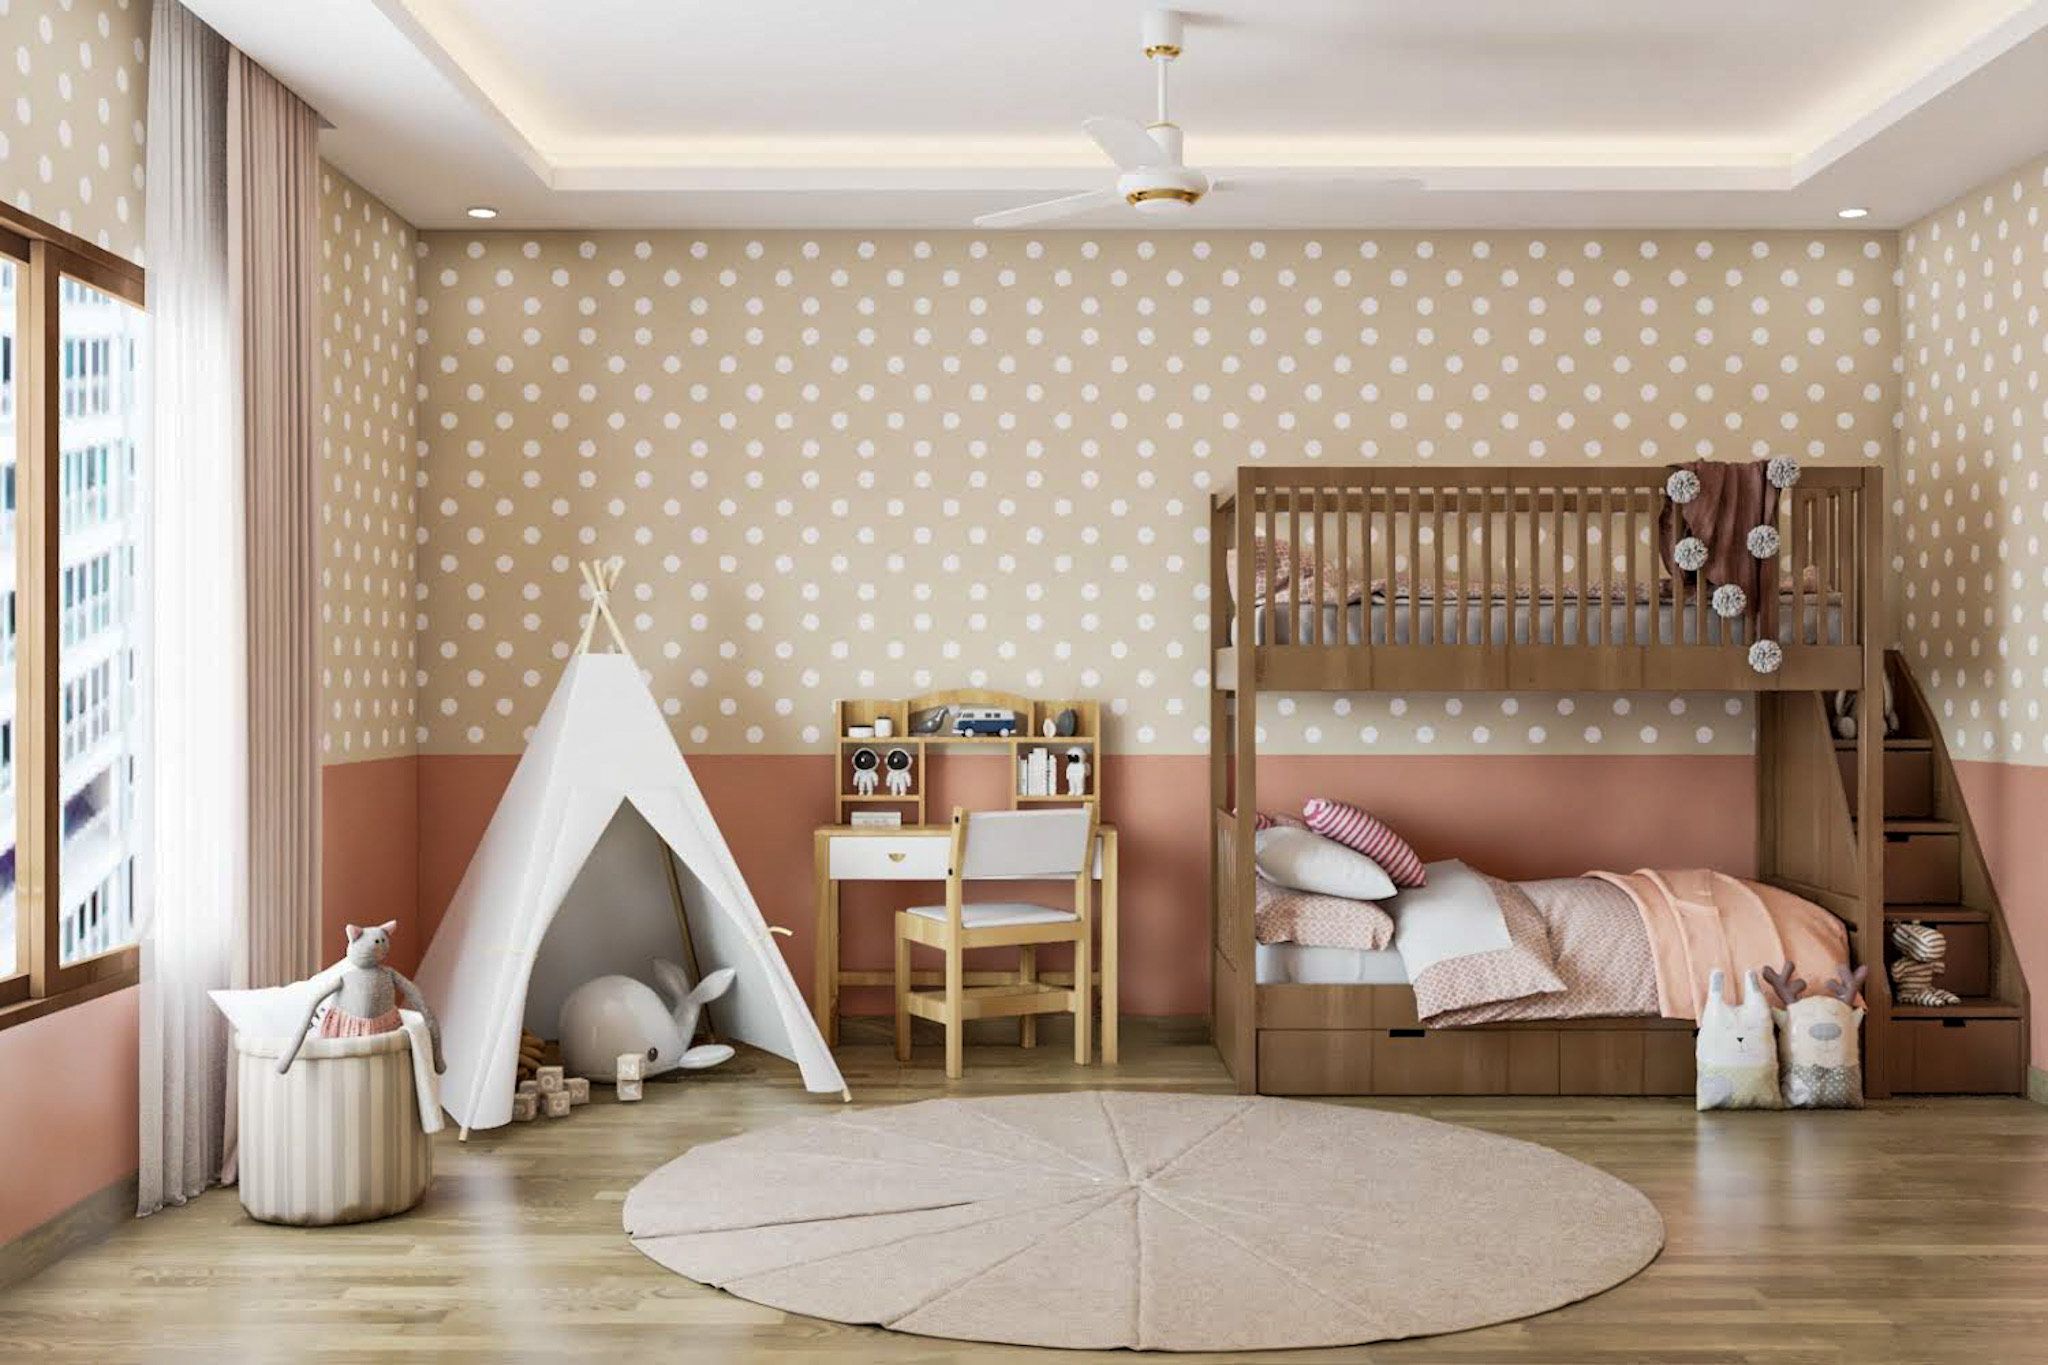 Modern Beige And Peach Wall Paint Design For Kids Bedrooms